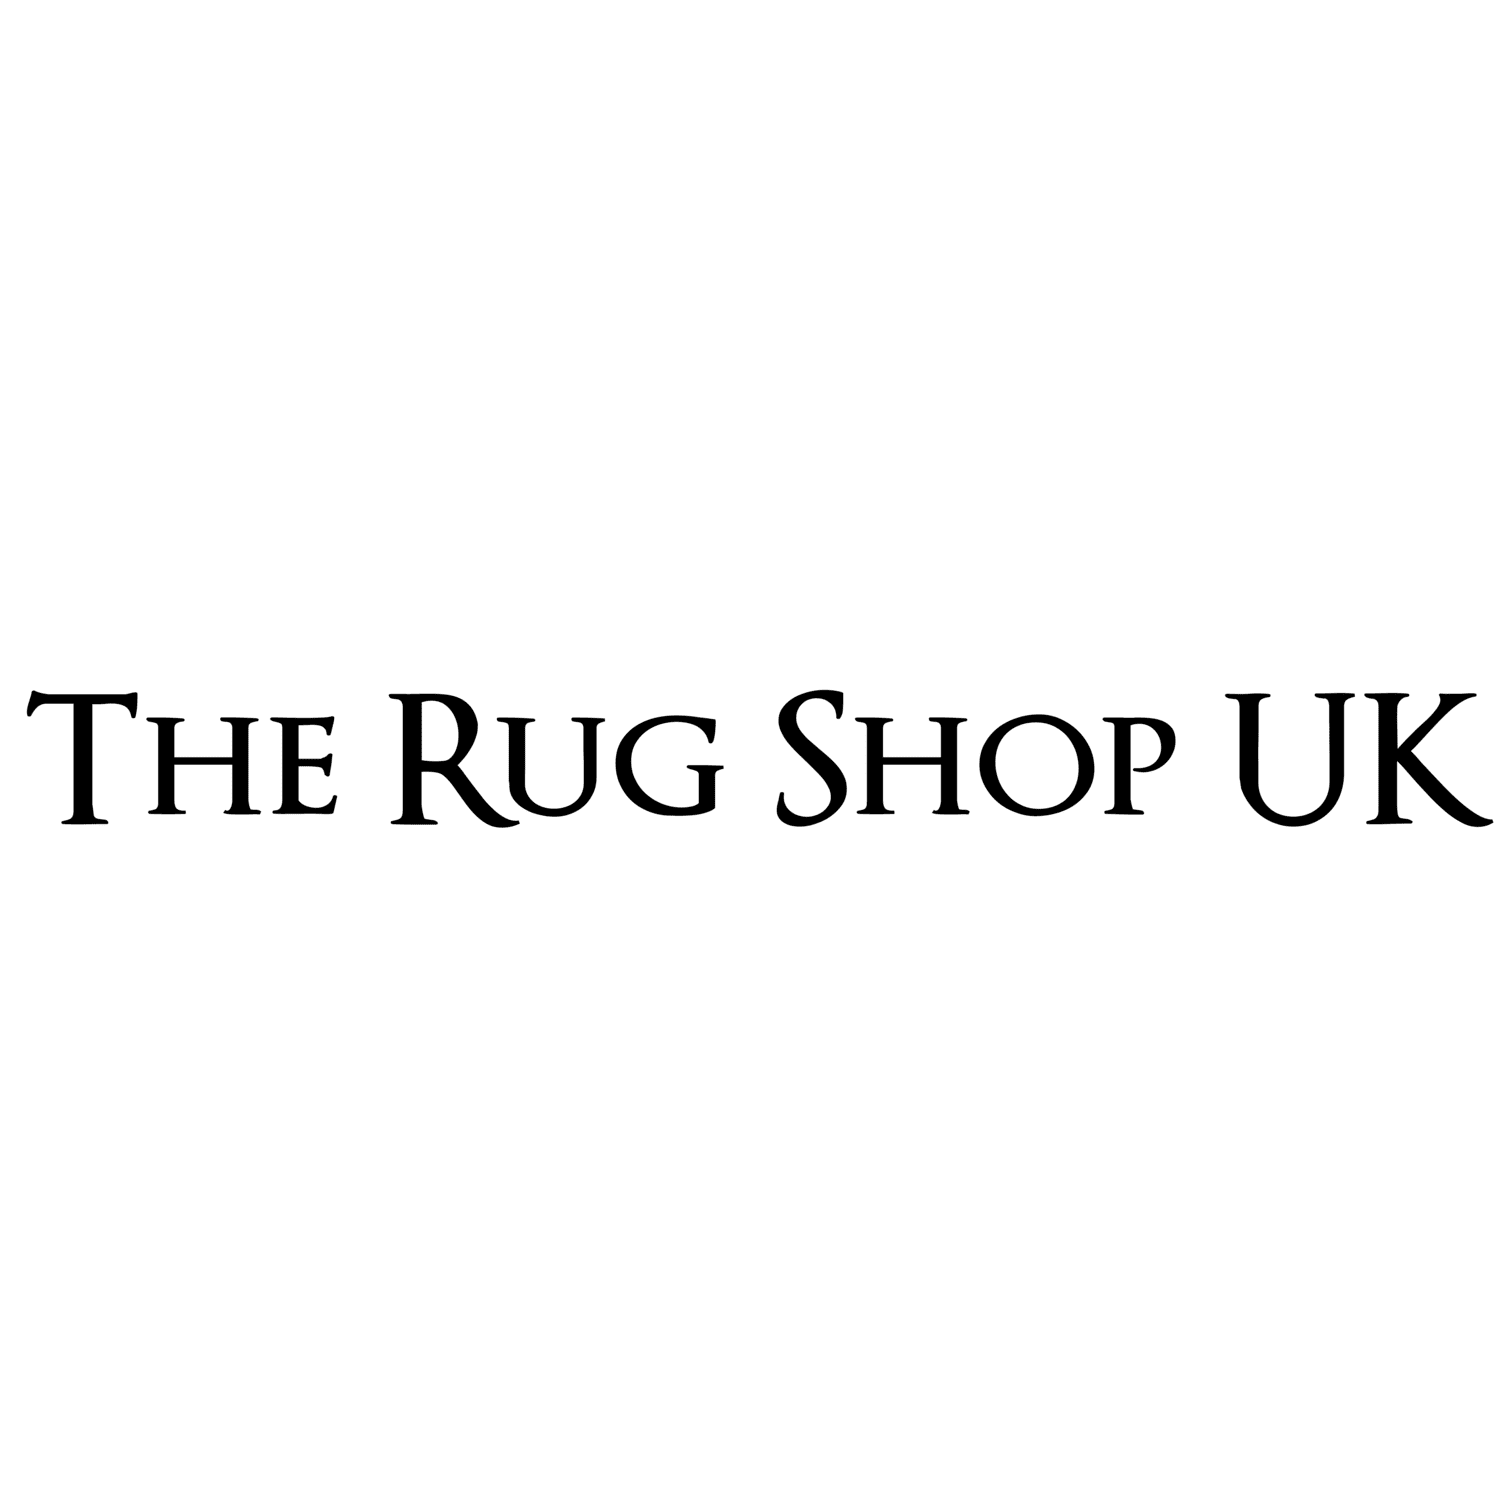 Main image for The Rug Shop UK